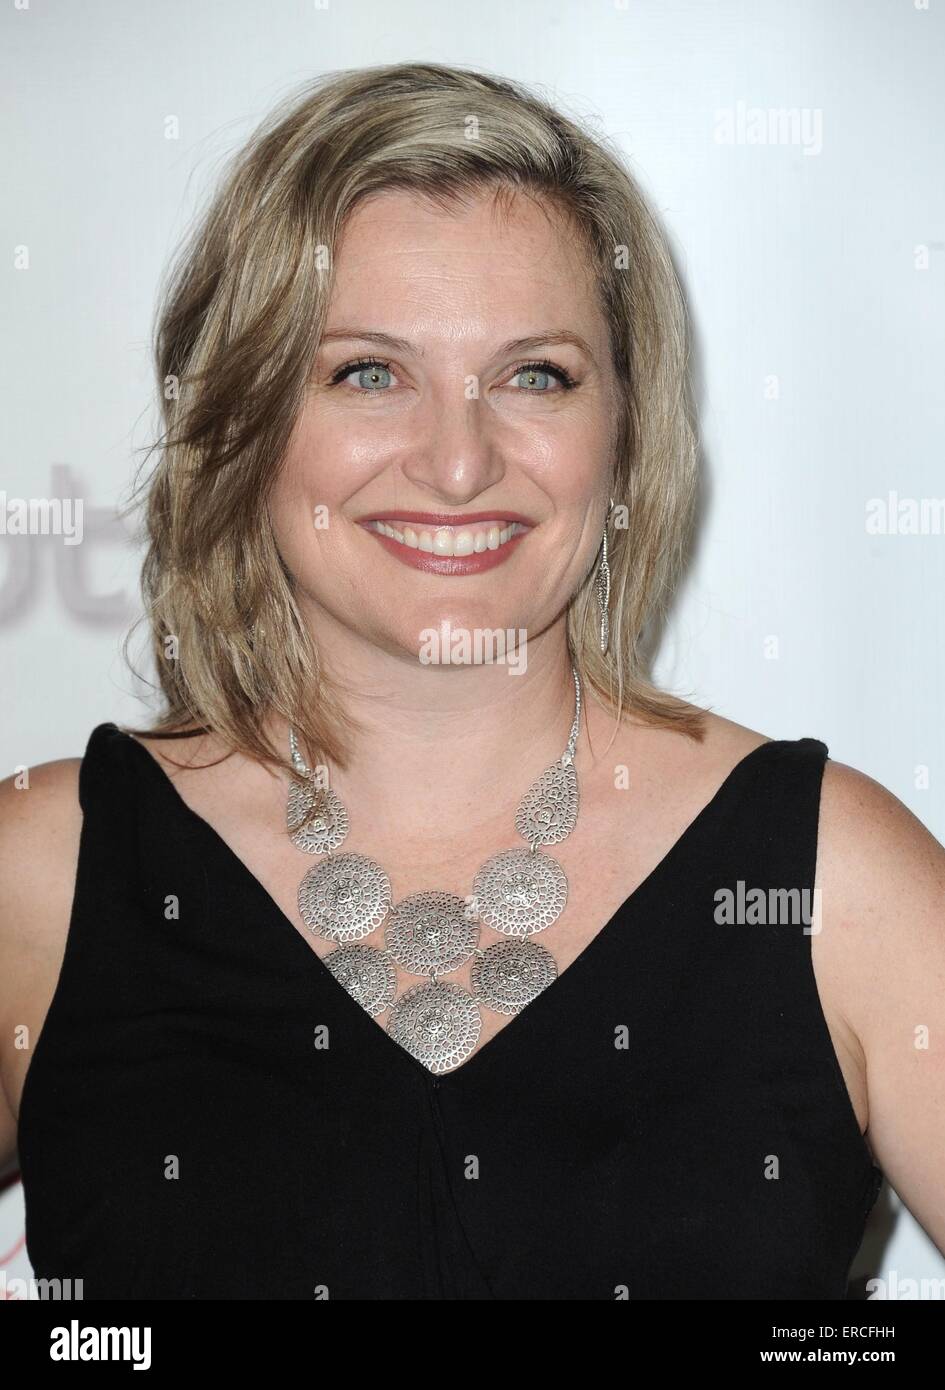 Maria McCann at arrivals for THE AFTERMATH World Premiere, TCL Chinese 6 Theatres (formerly Grauman's), Los Angeles, CA May 31, 2015. Stock Photo